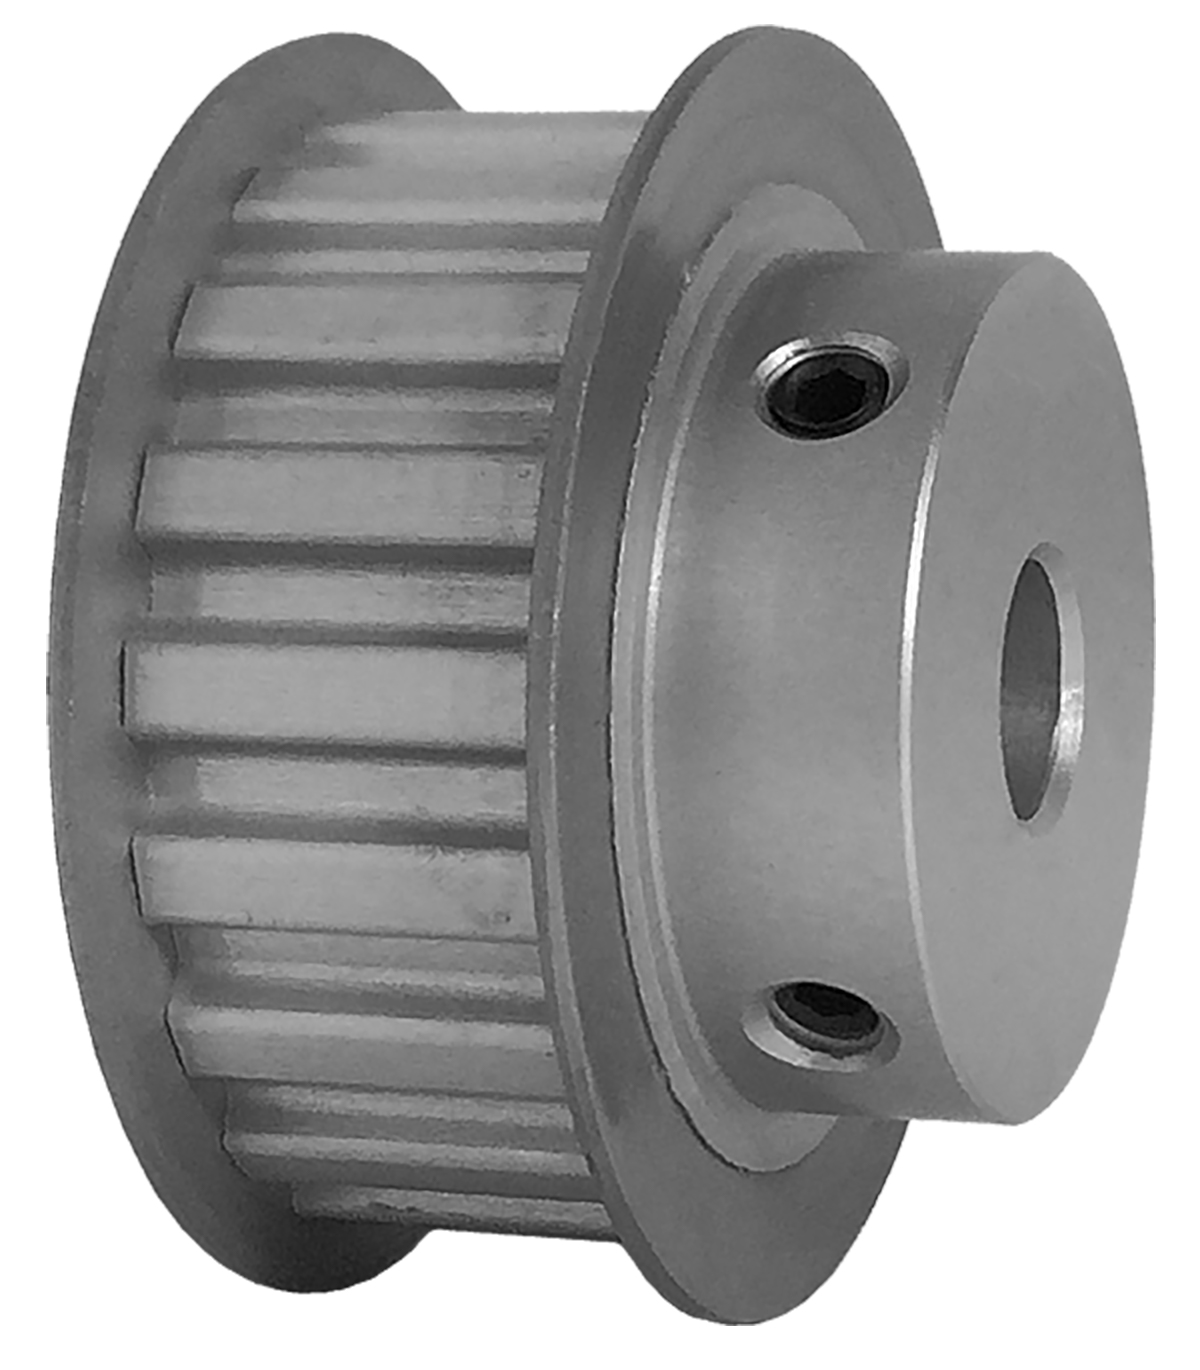 19L075-6FA6 - Aluminum Imperial Pitch Pulleys